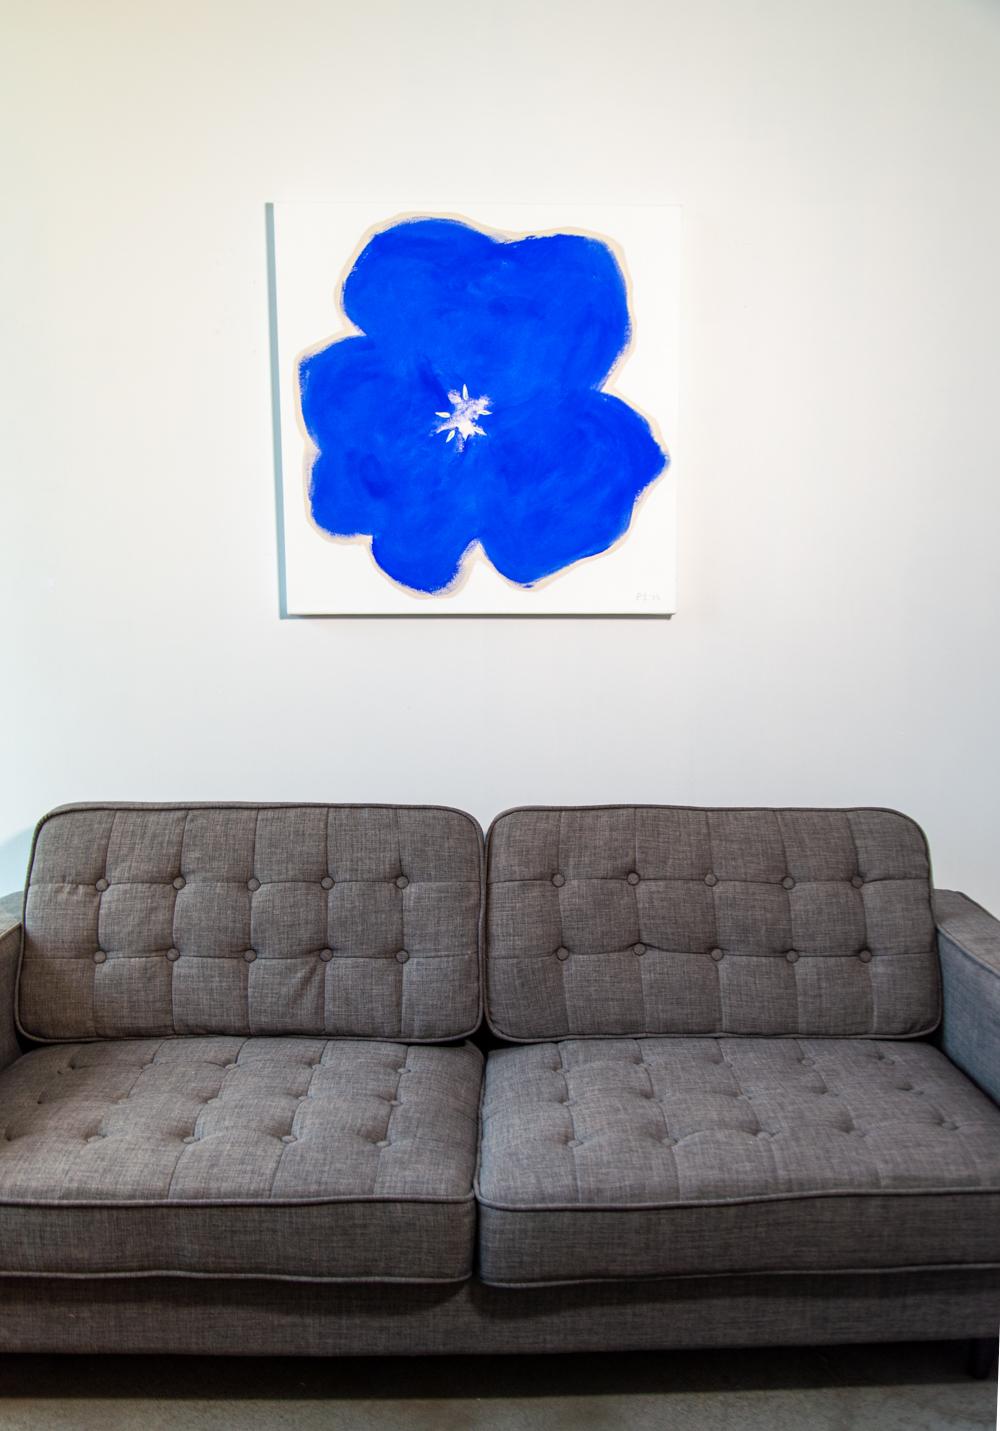 The distinctive shape of a pansy in bright blue pops from the canvas in this engaging floral abstract by Vancouver artist, Pat Service. Reminiscent of Andy Warhol, Service’s flowers are pared down to the essentials--simple shapes without leaves or